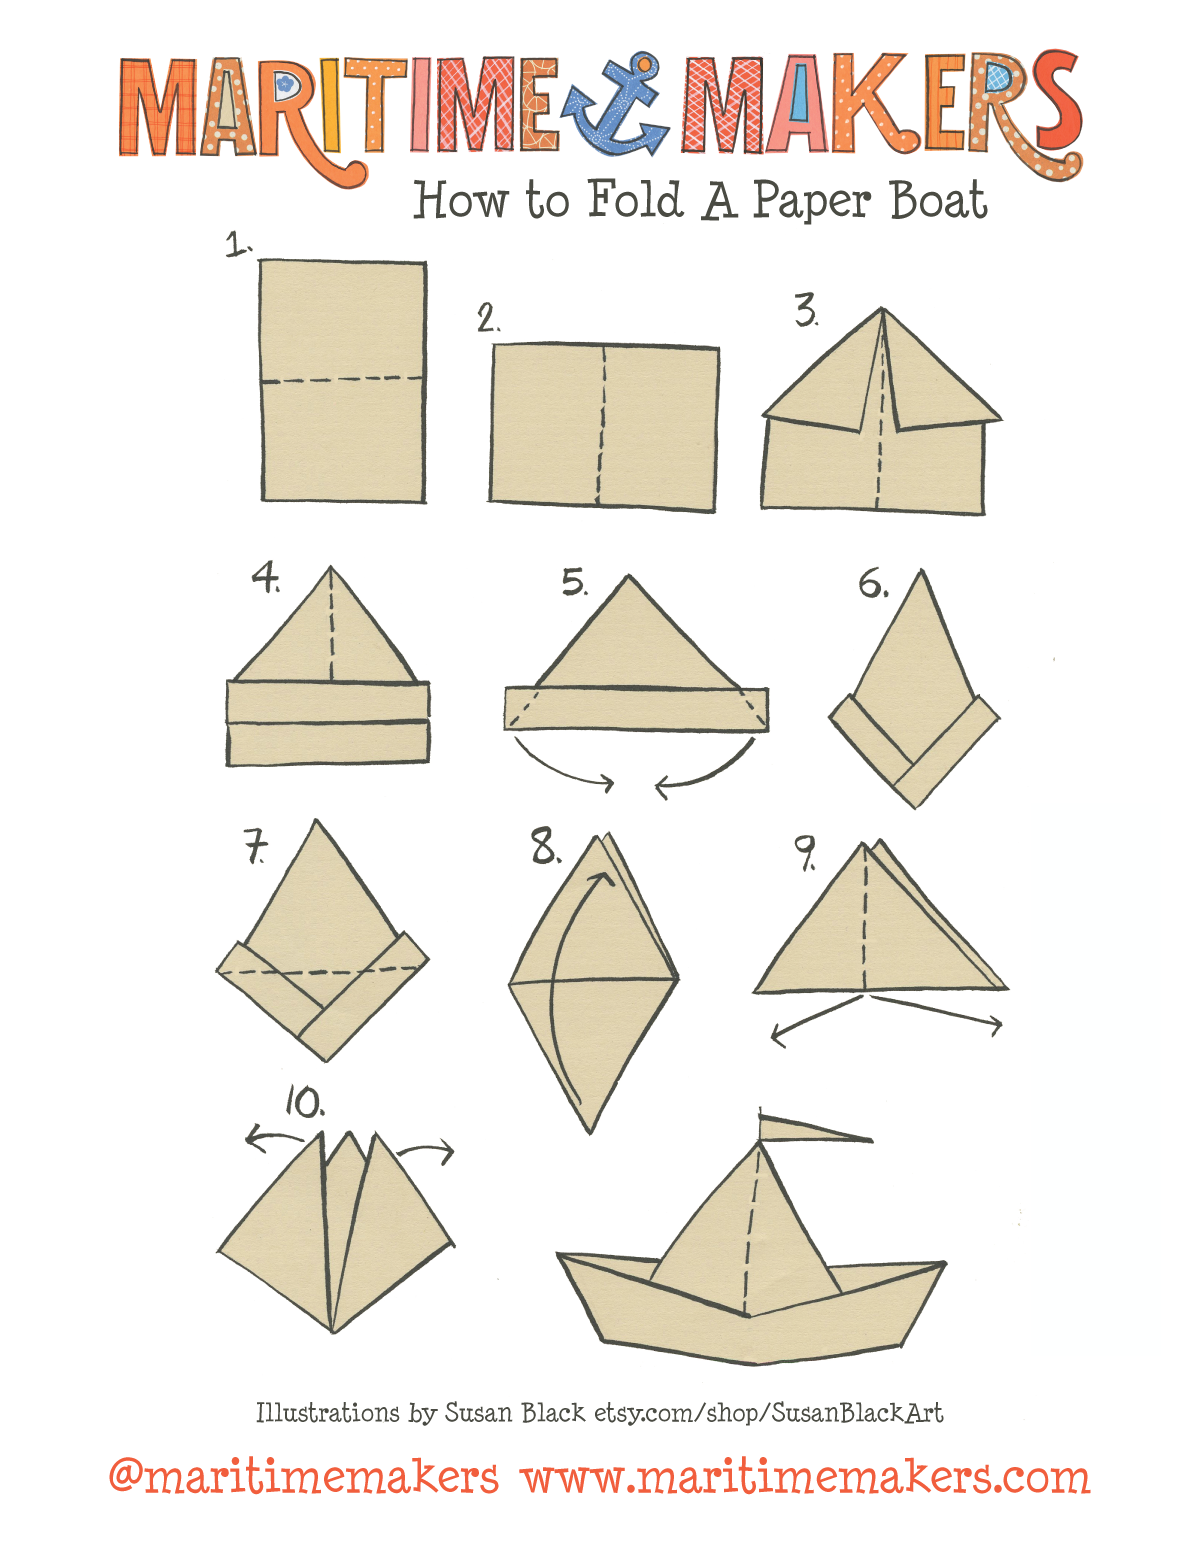 Maritime Makers, How to Fold a Paper Boat printable instructions by Susan Black Design